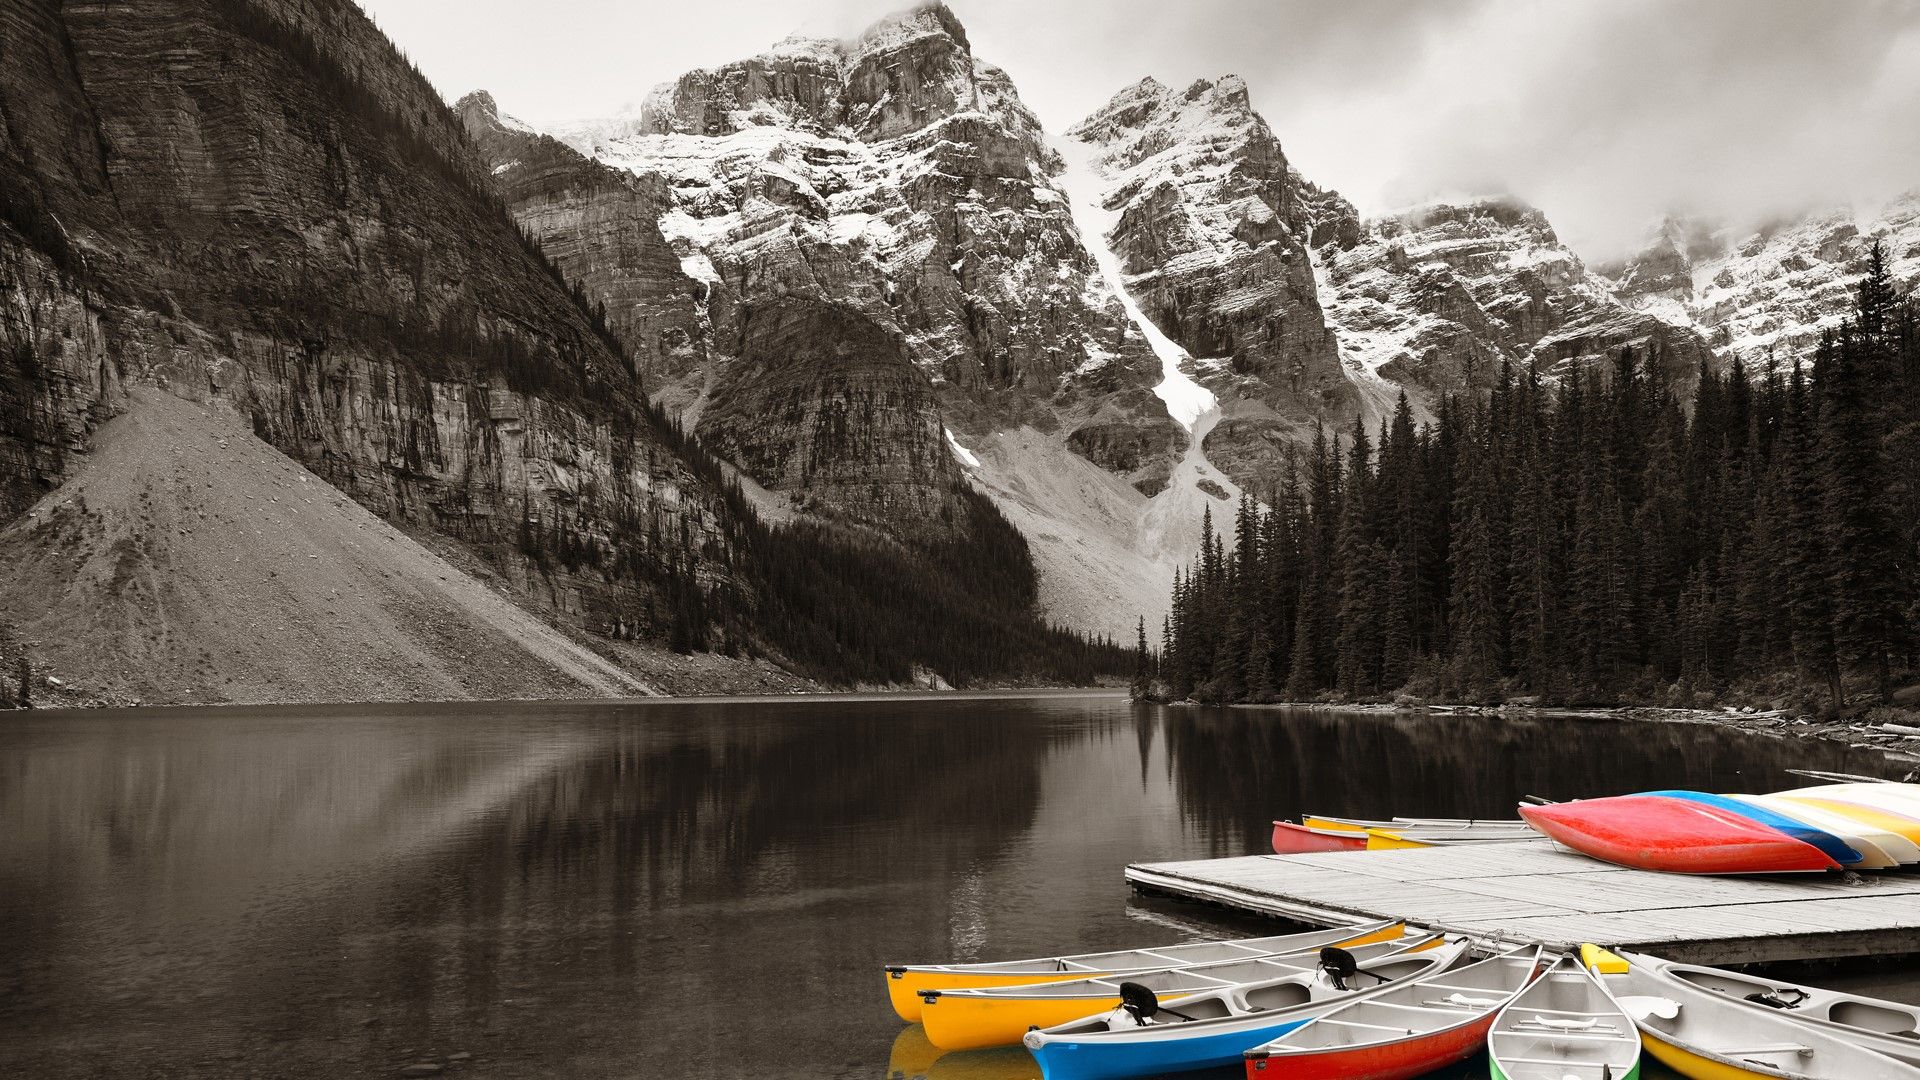 Moraine Lake and boats with snow capped .windows10spotlight.com